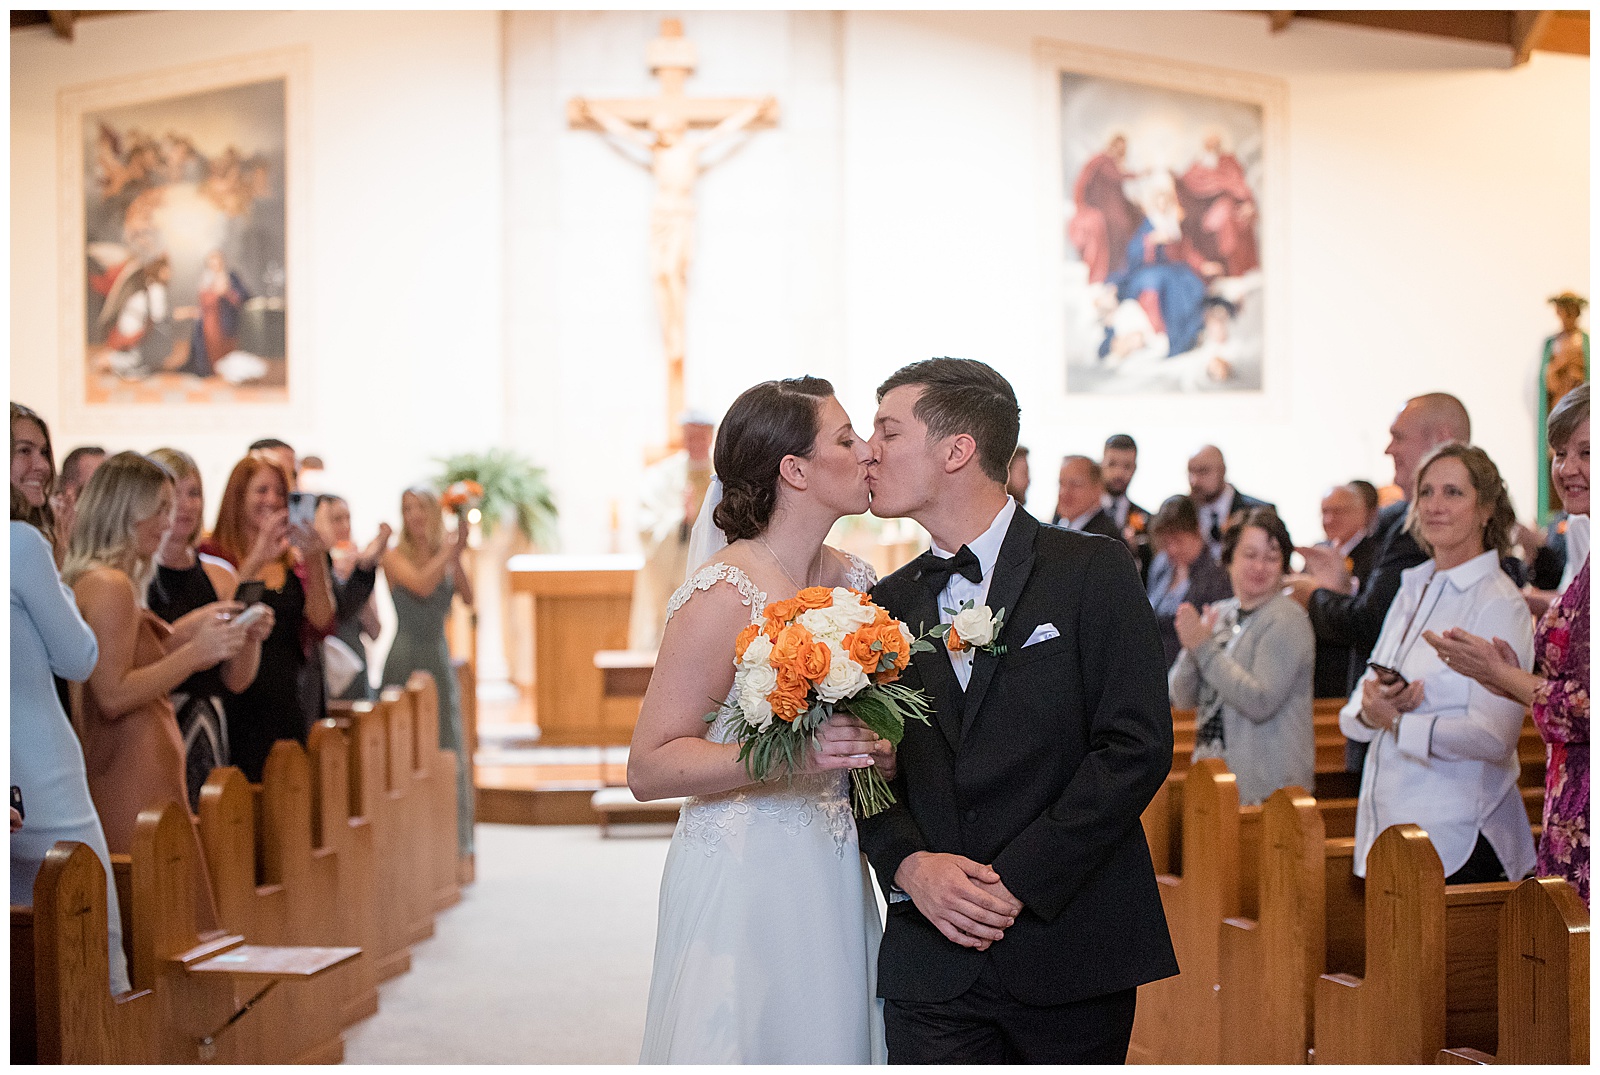 bride and groom kissing at the end of aisle as they're leaving wedding ceremony and guests are turned around watching them in collegeville pennsylvania